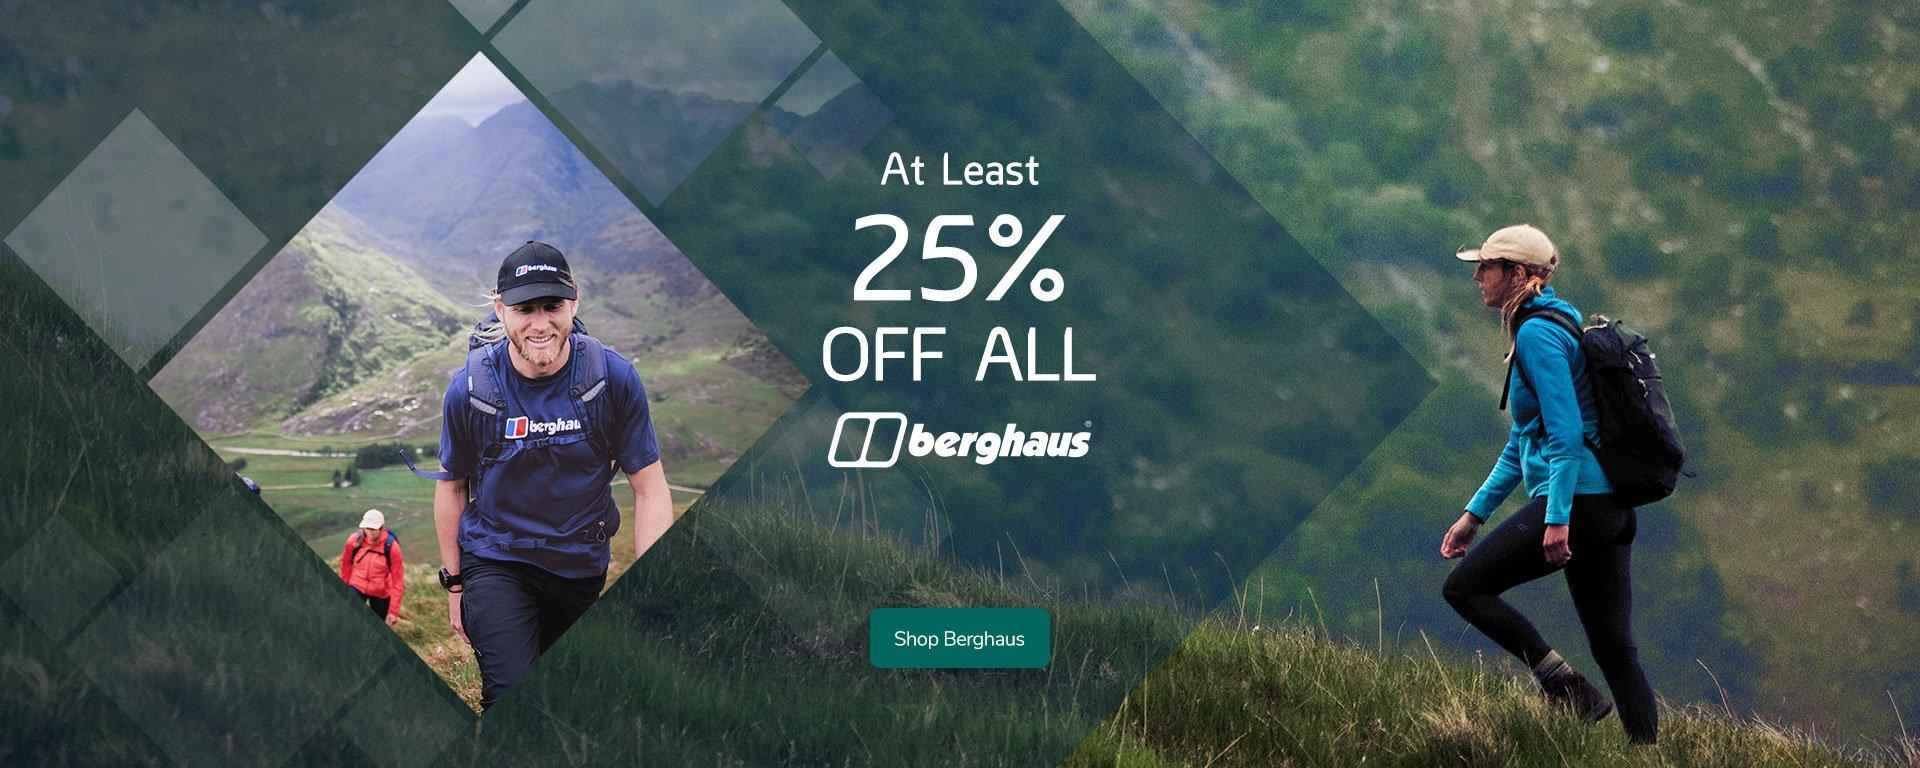 Shop Berghaus | At Least 25% OFF